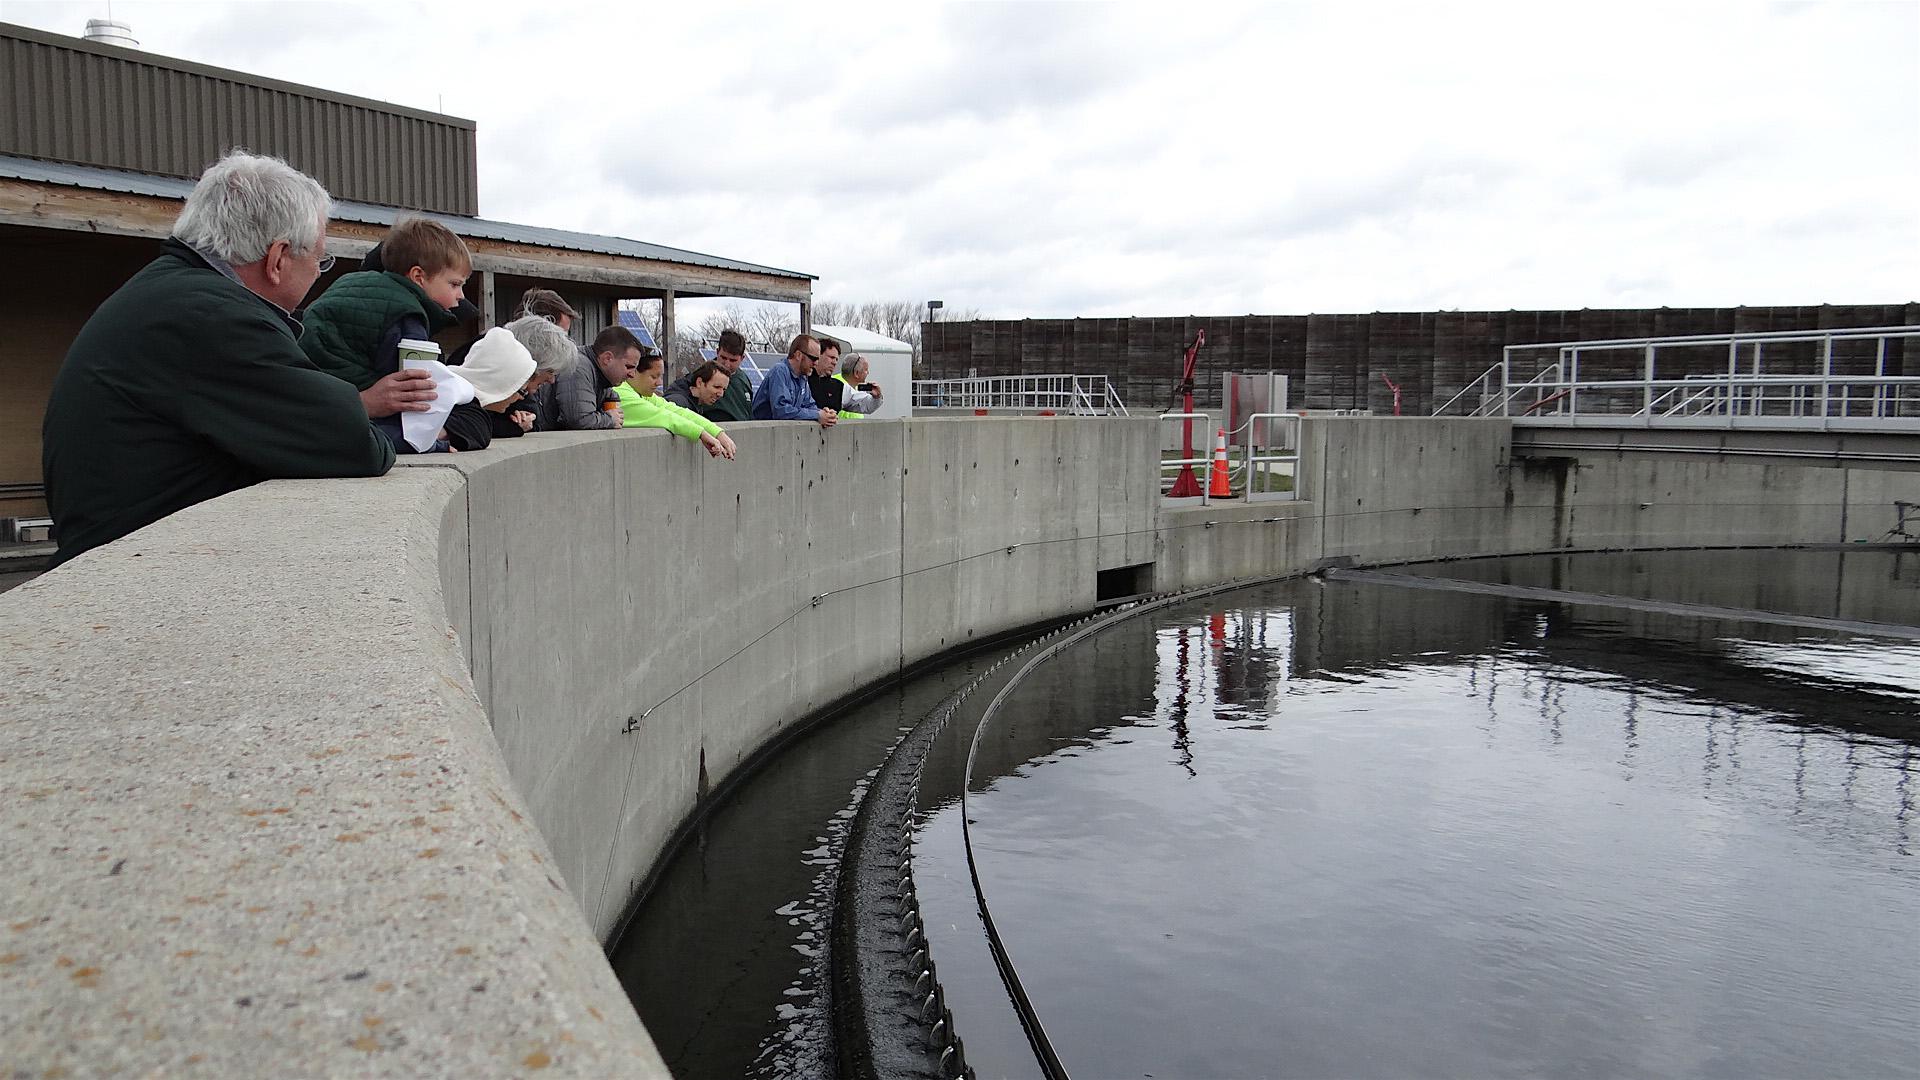 Fairfield’s finance board approves additional $300K grant for wastewater treatment project